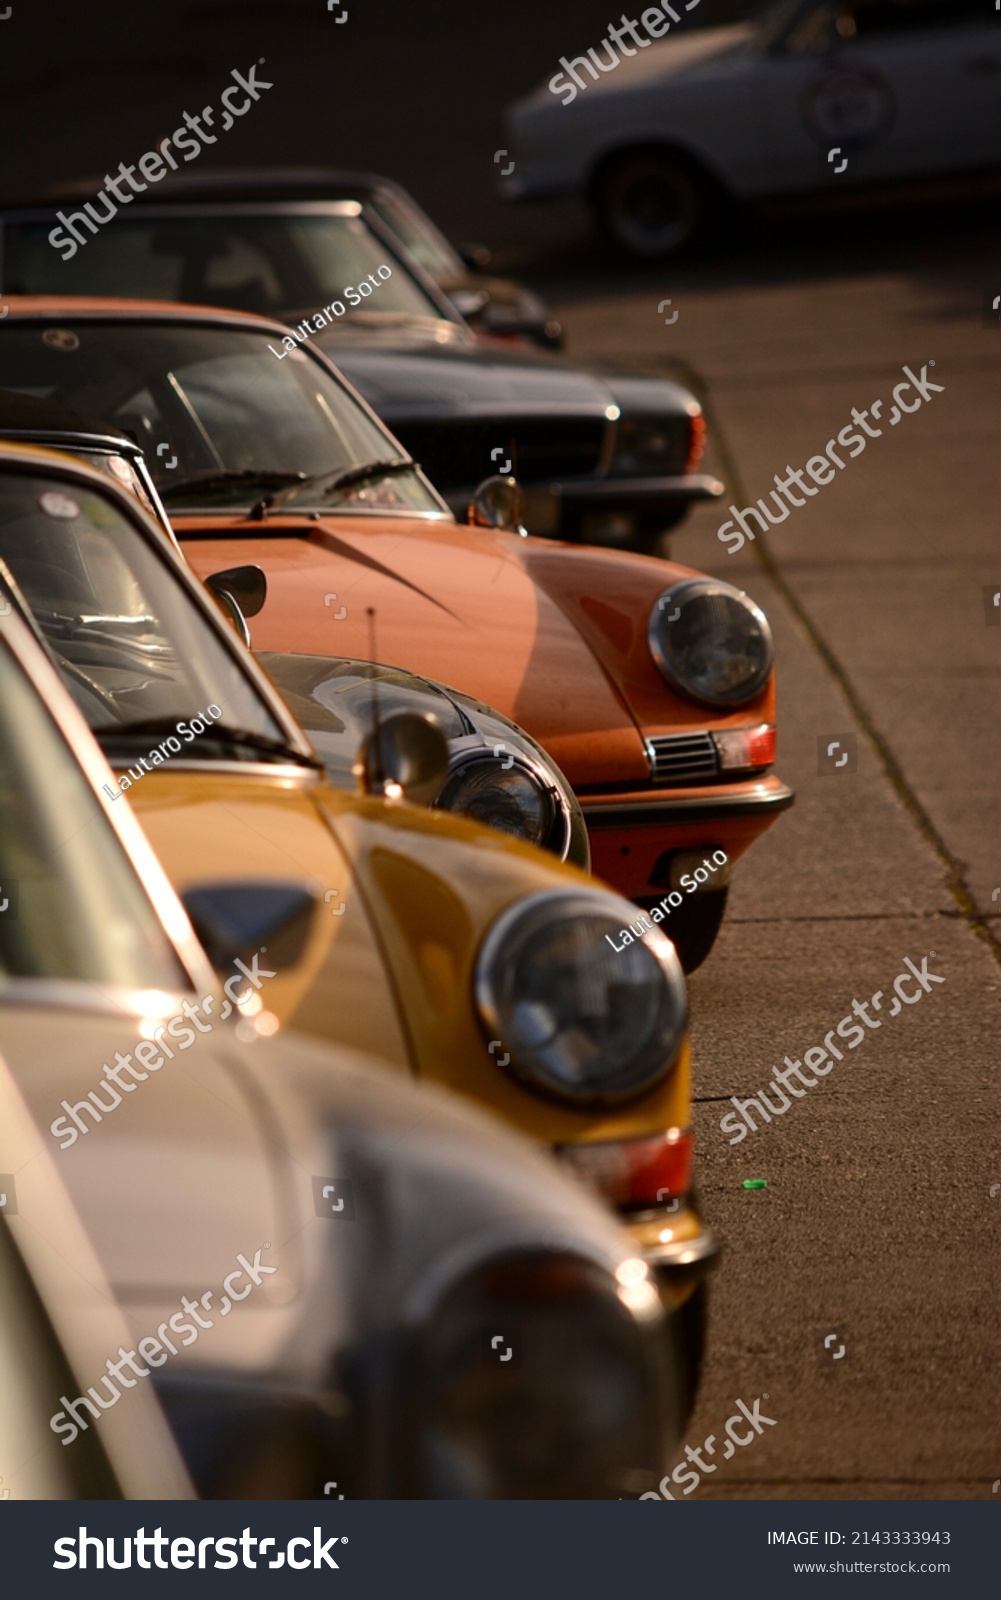 sports collection cars parked with selective focus, vintage cars in different colors. all german cars #2143333943